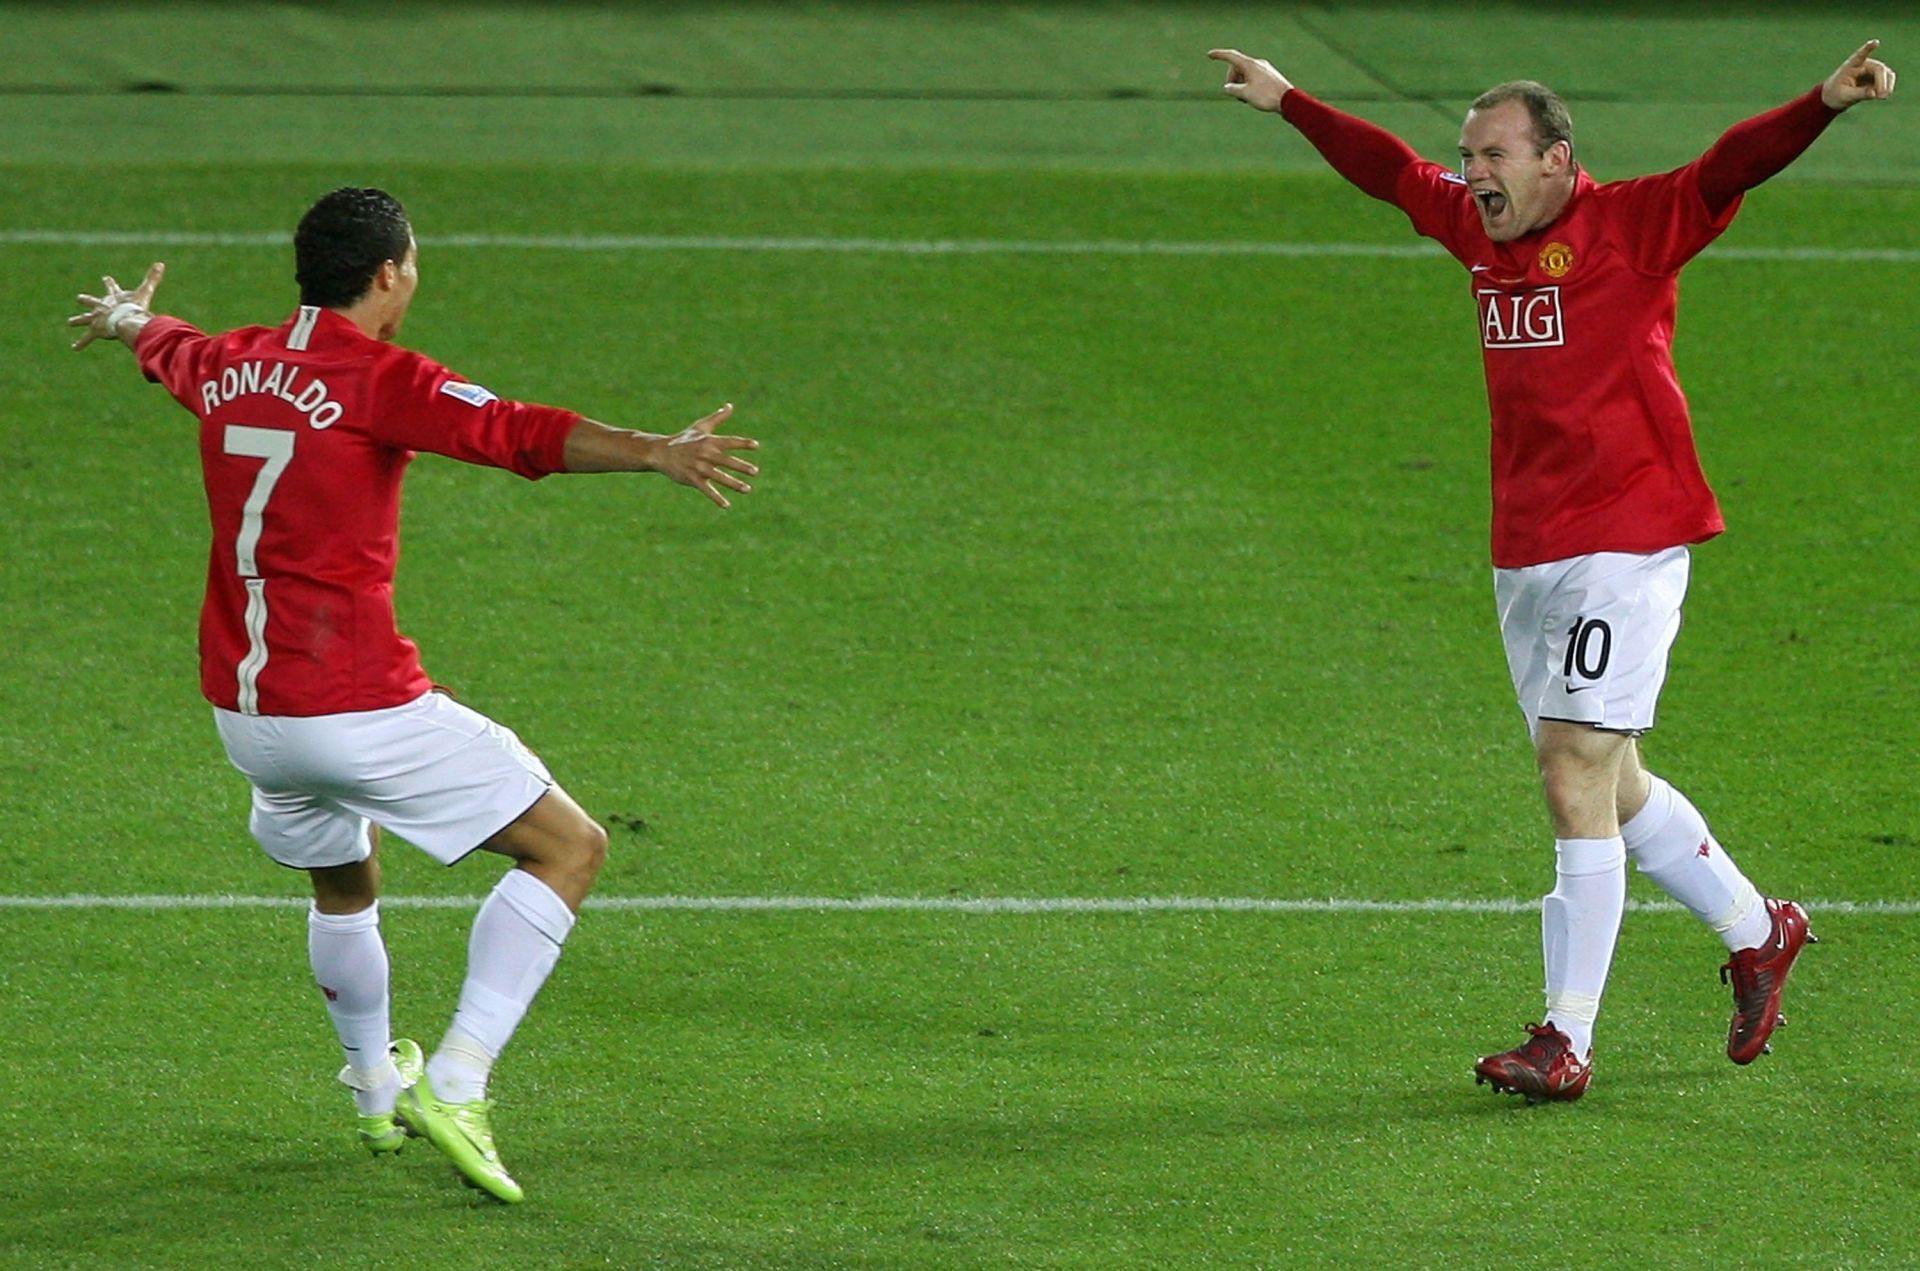 Ronaldo and Rooney were teammates at United